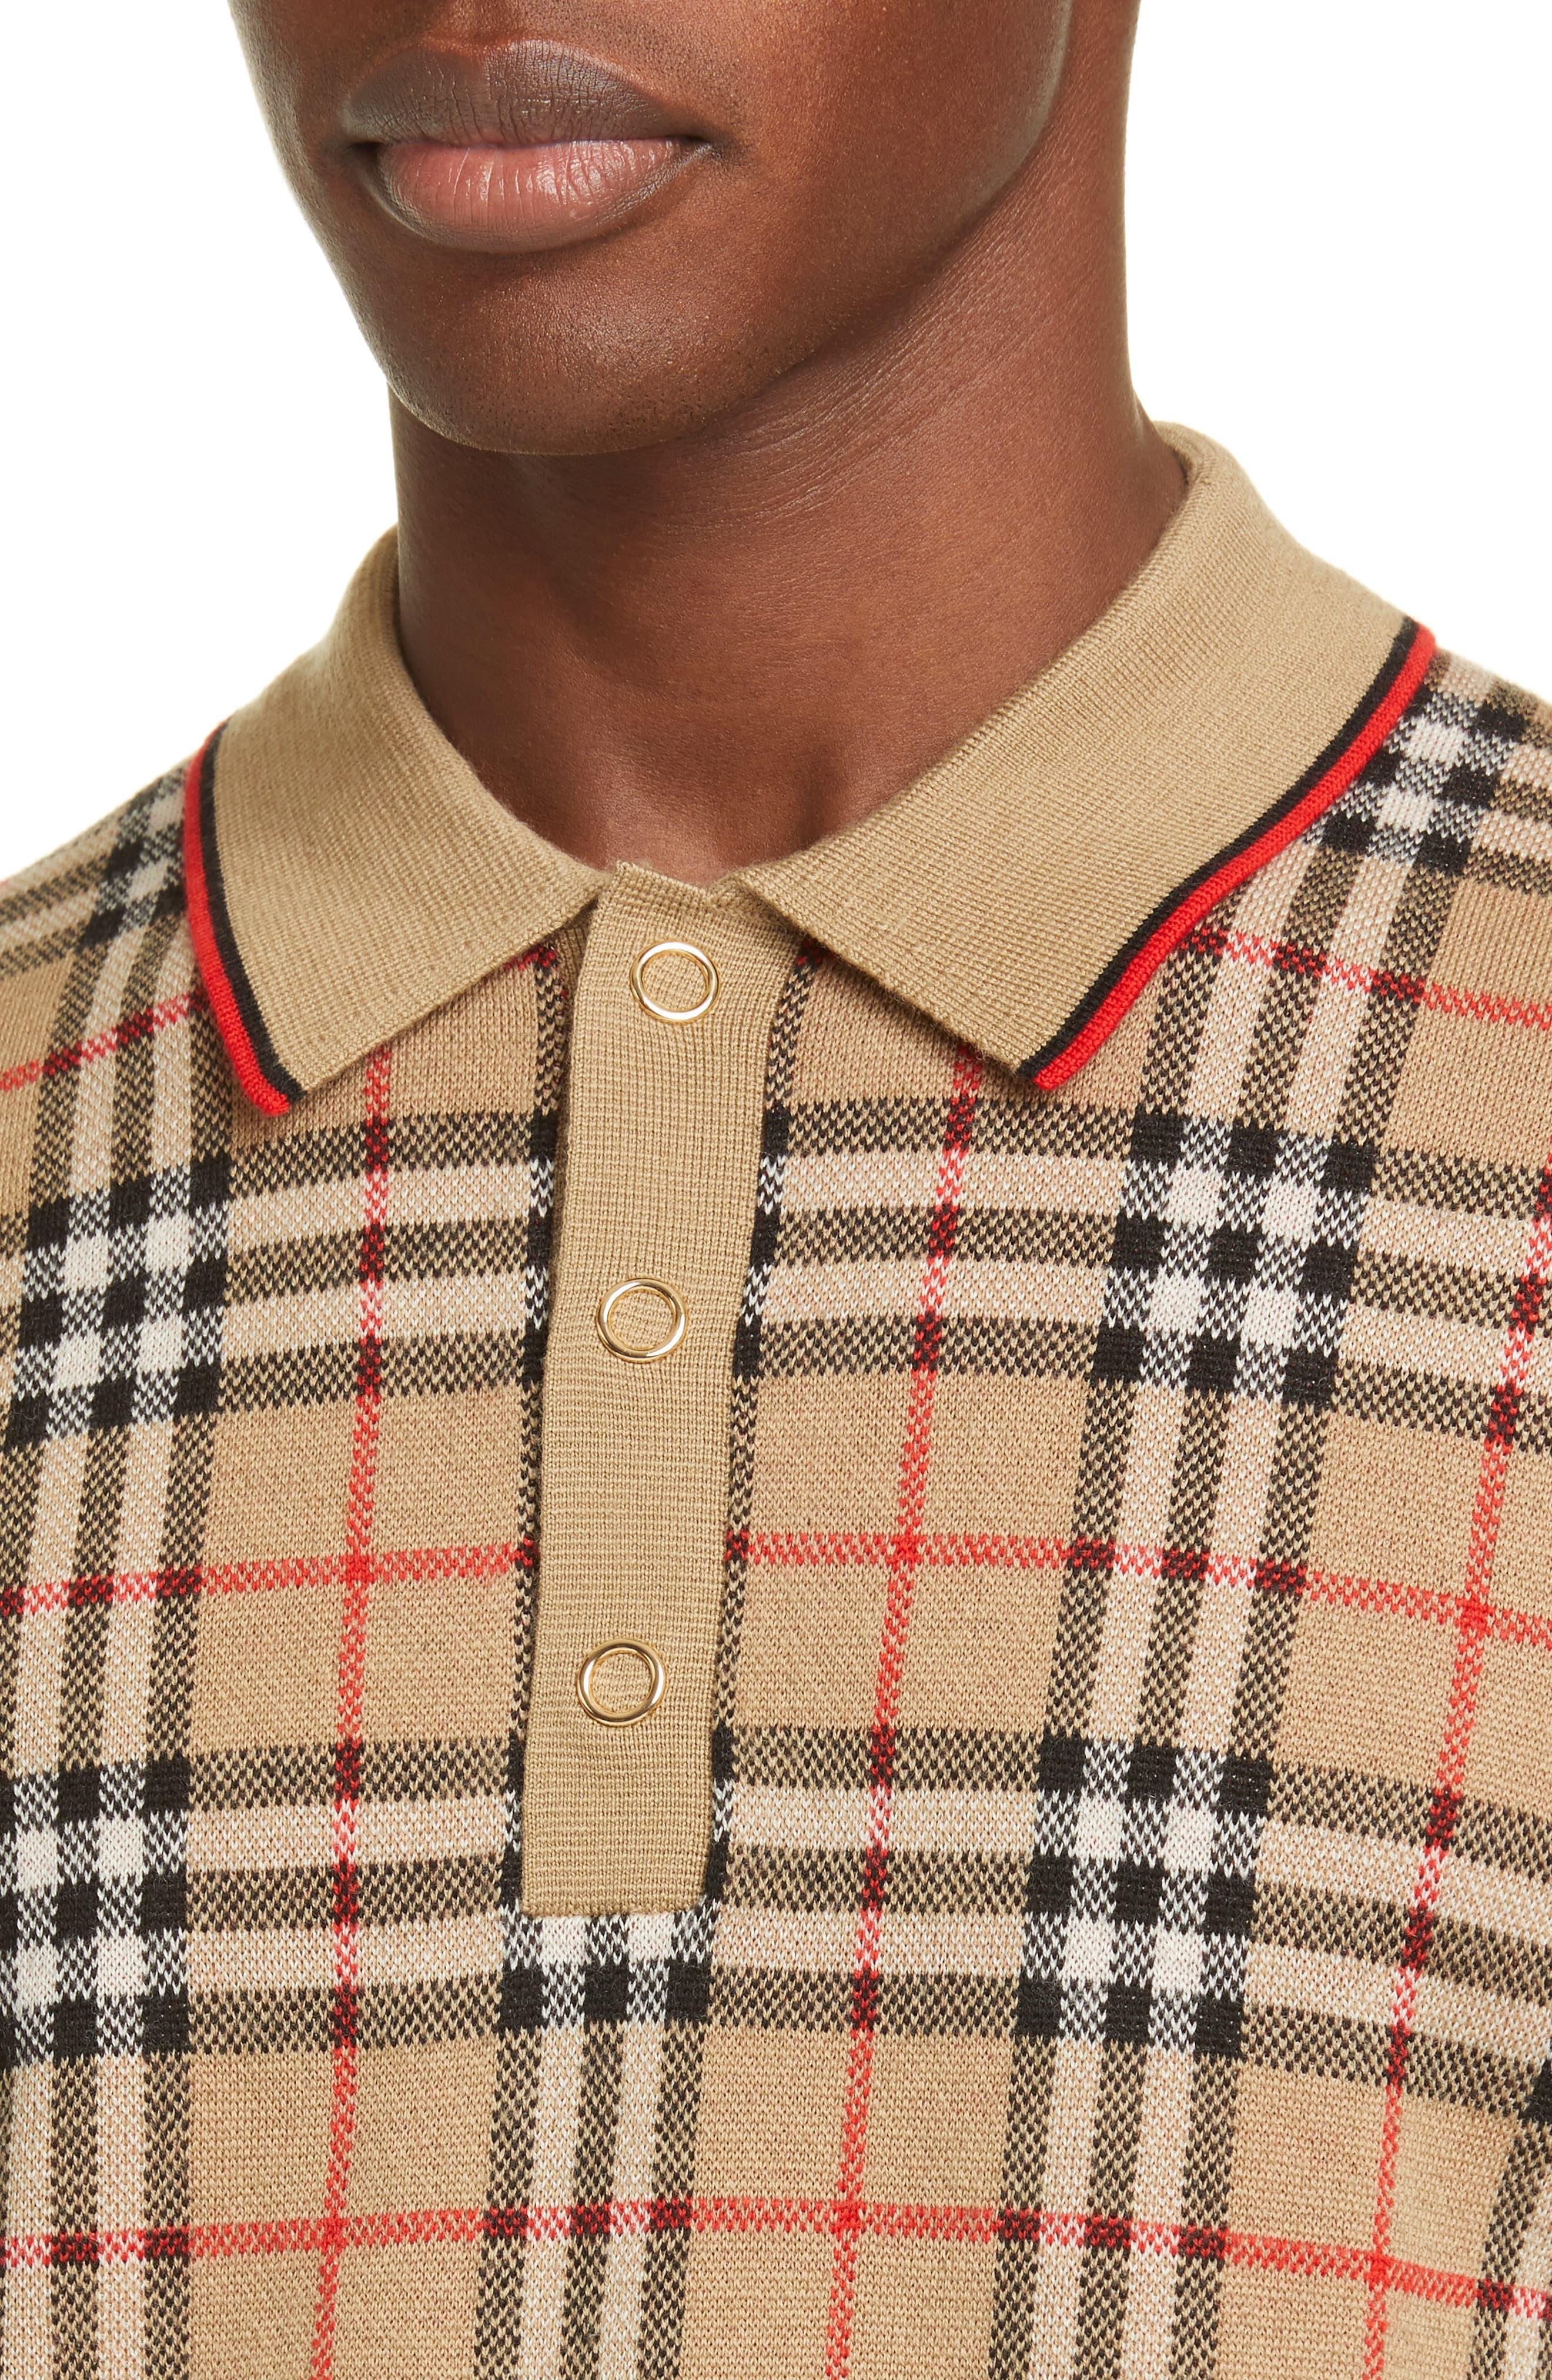 Burberry Vintage Check Merino Wool Polo Shirt in Natural for Men 